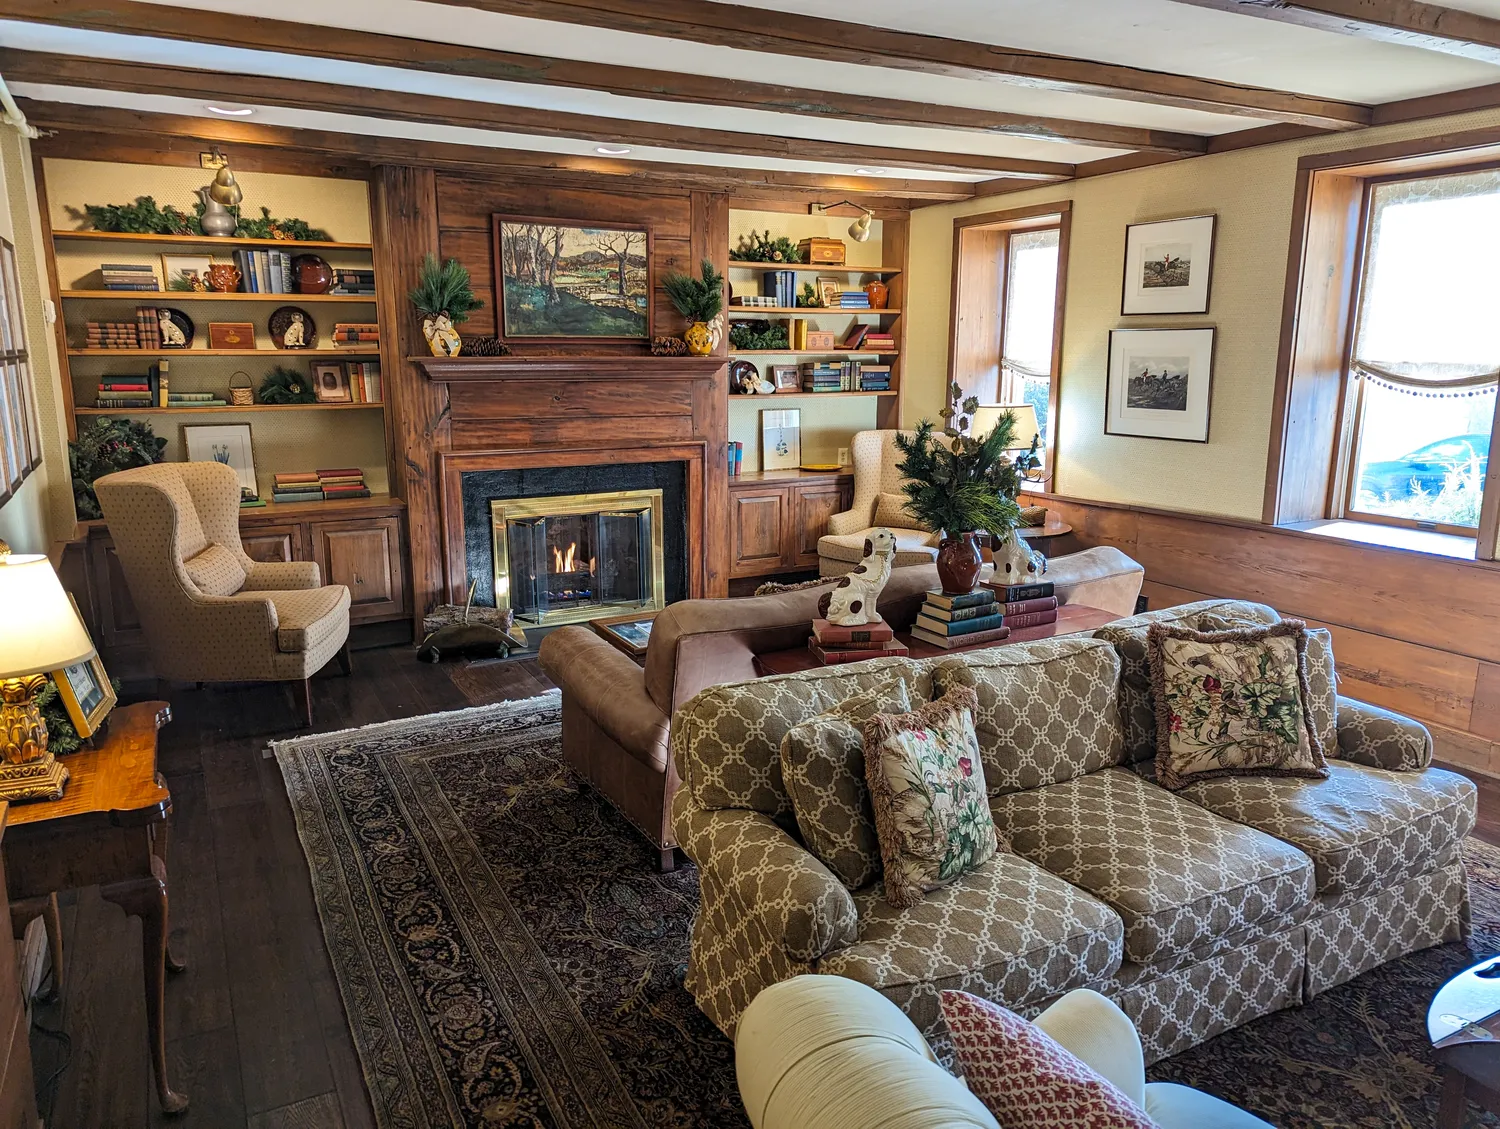 The lobby sitting area at Golden Plough Inn. 2 cozy couches, several chairs, and a roaring fireplace.